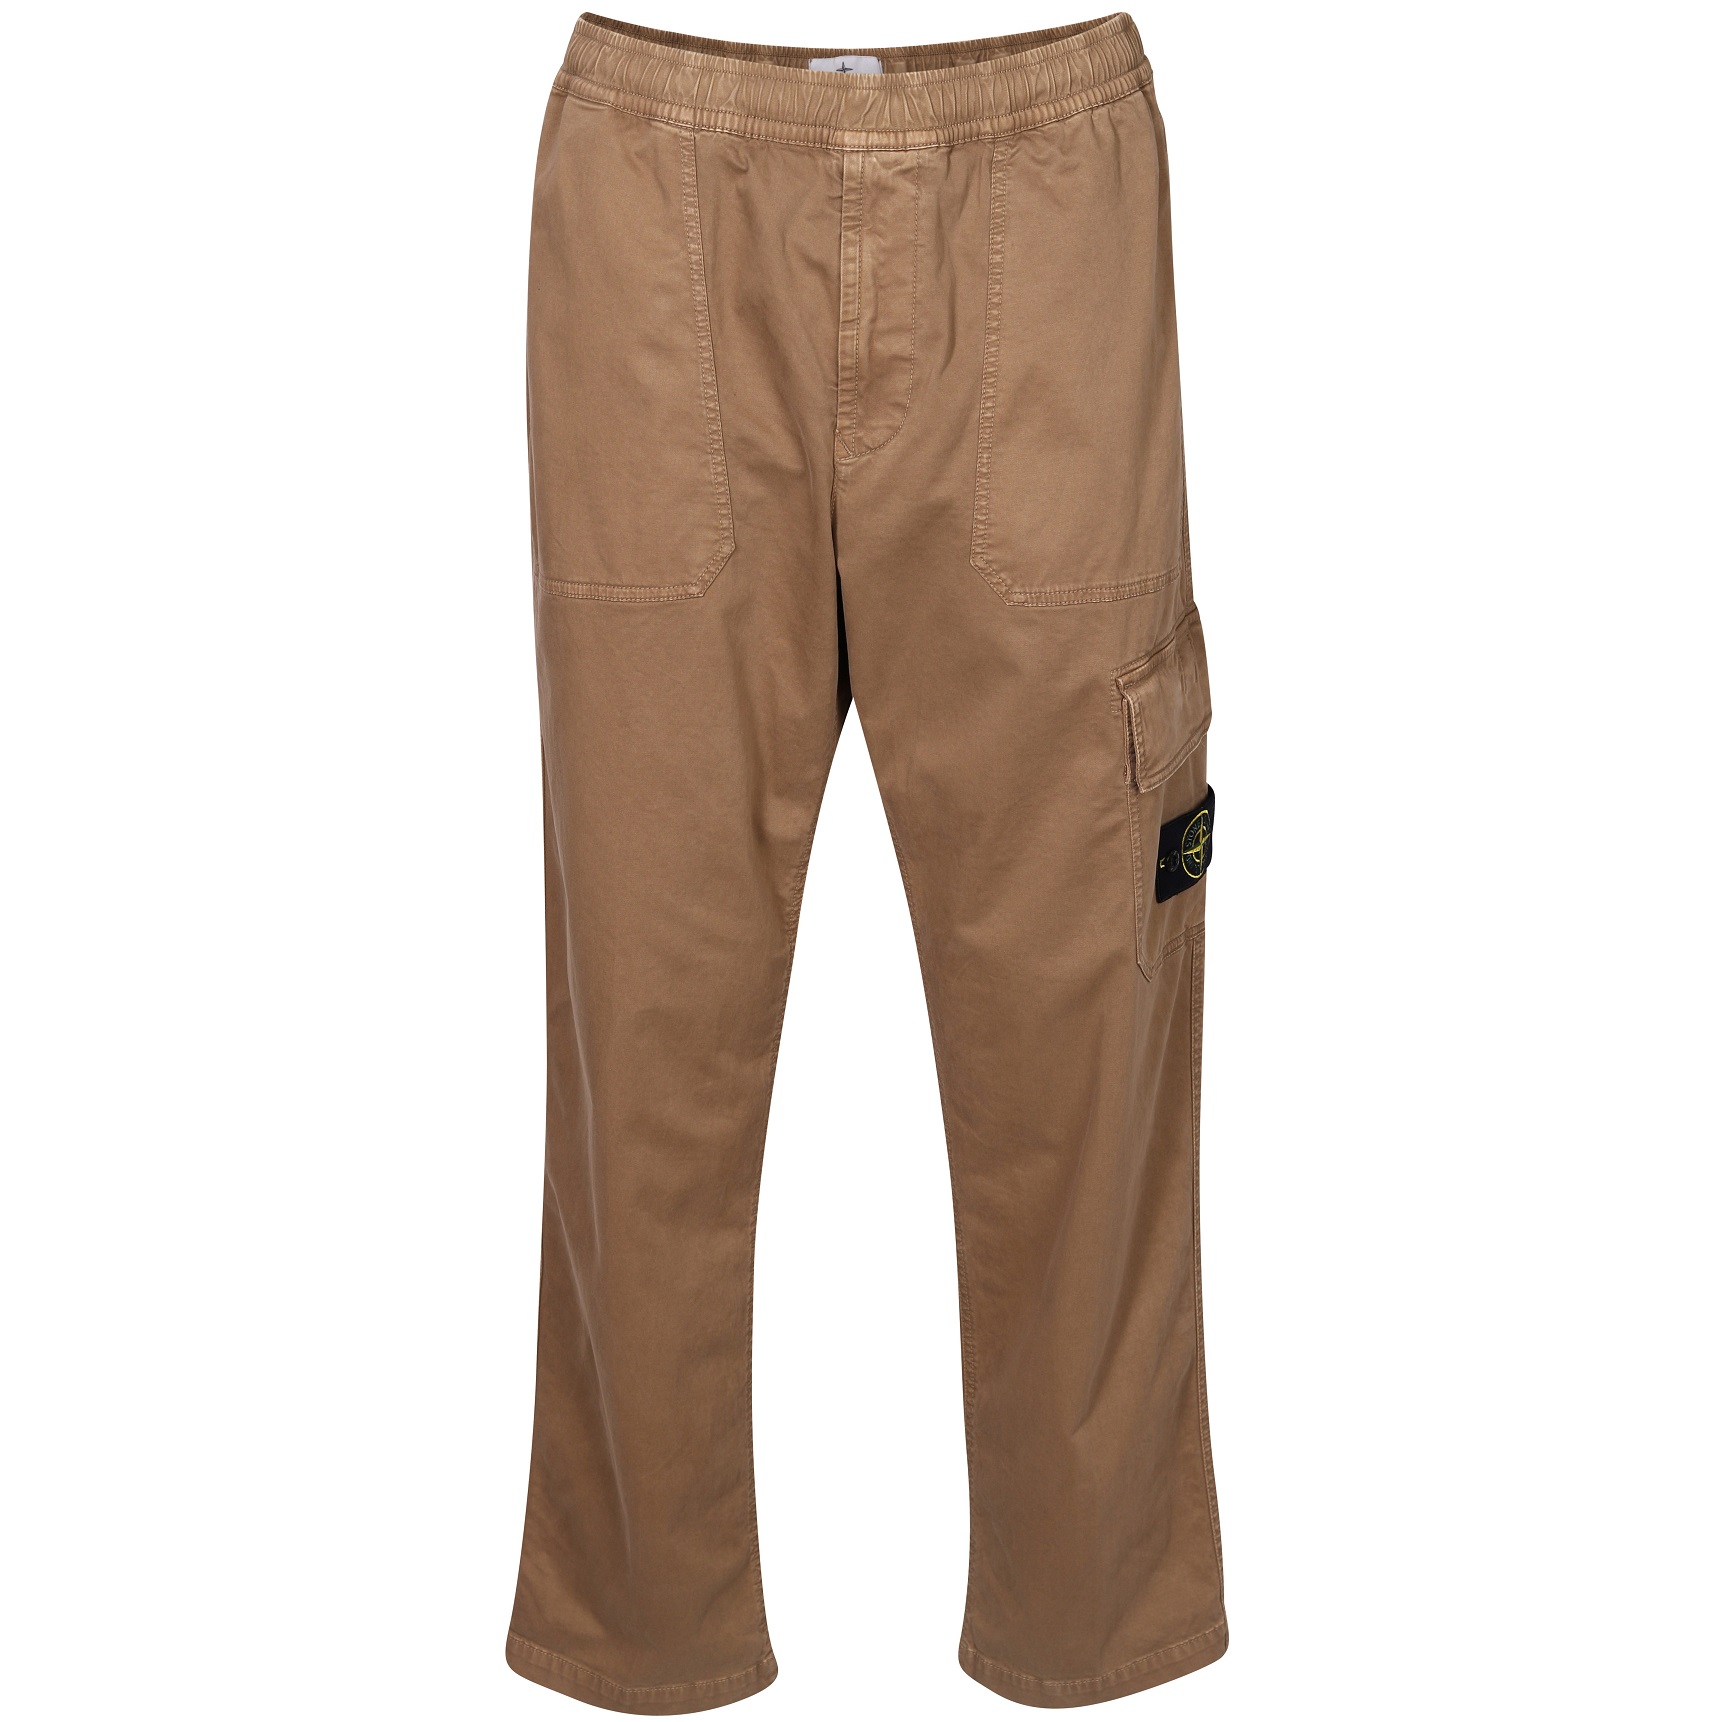 STONE ISLAND Loose Cargo Pant in Washed Dark Beige 32